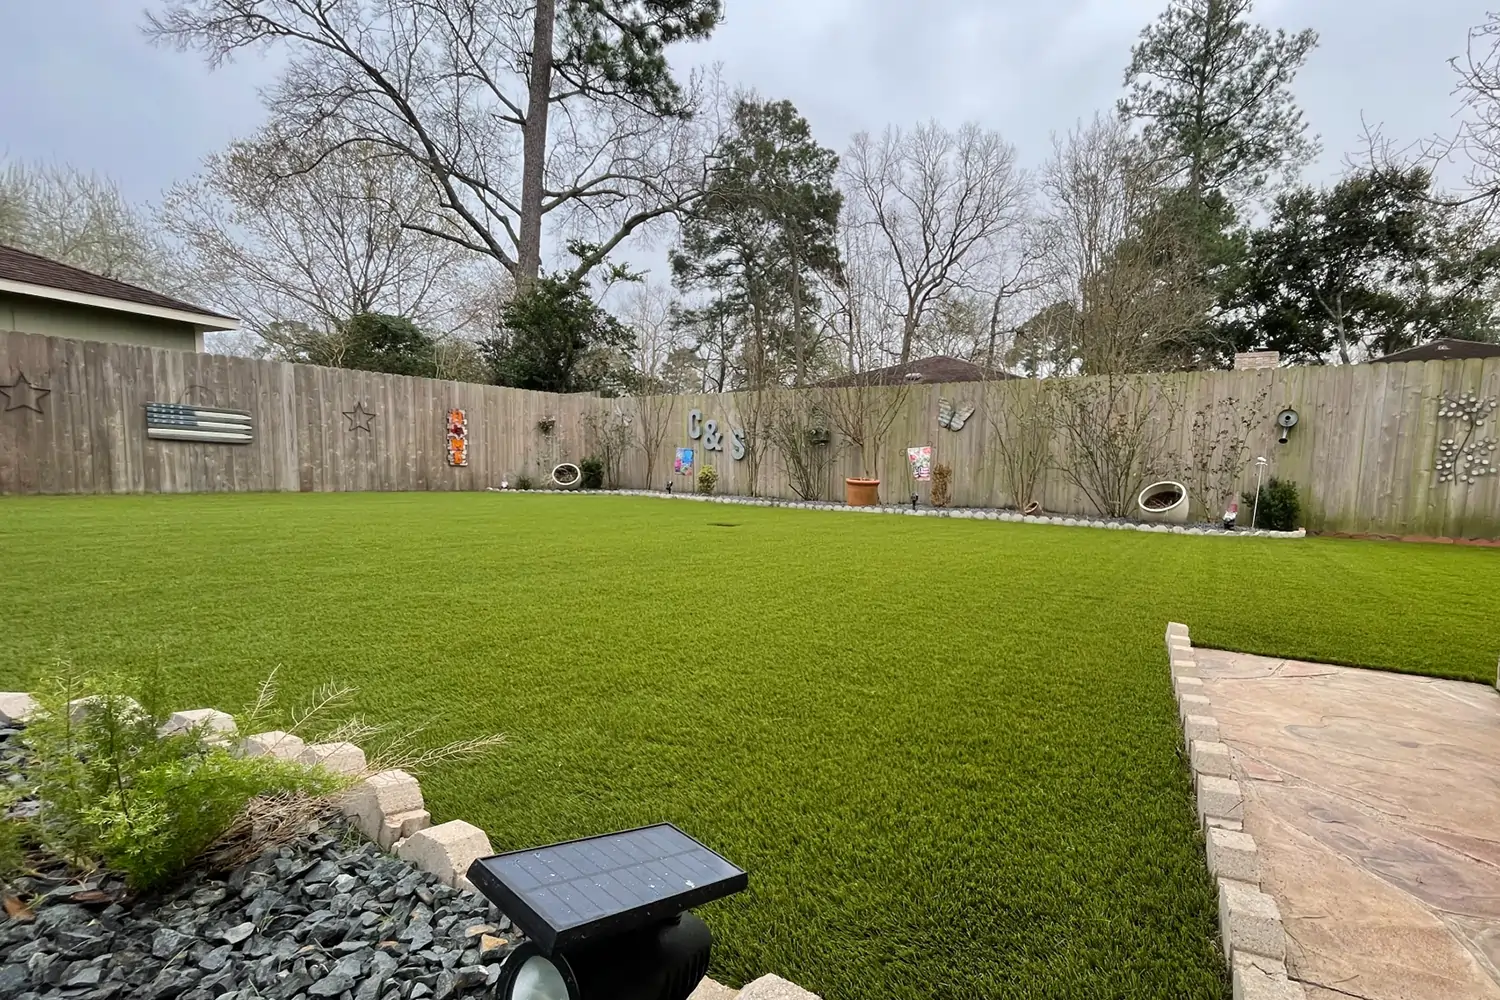 Backyard artificial grass lawn installed by SYNLawn